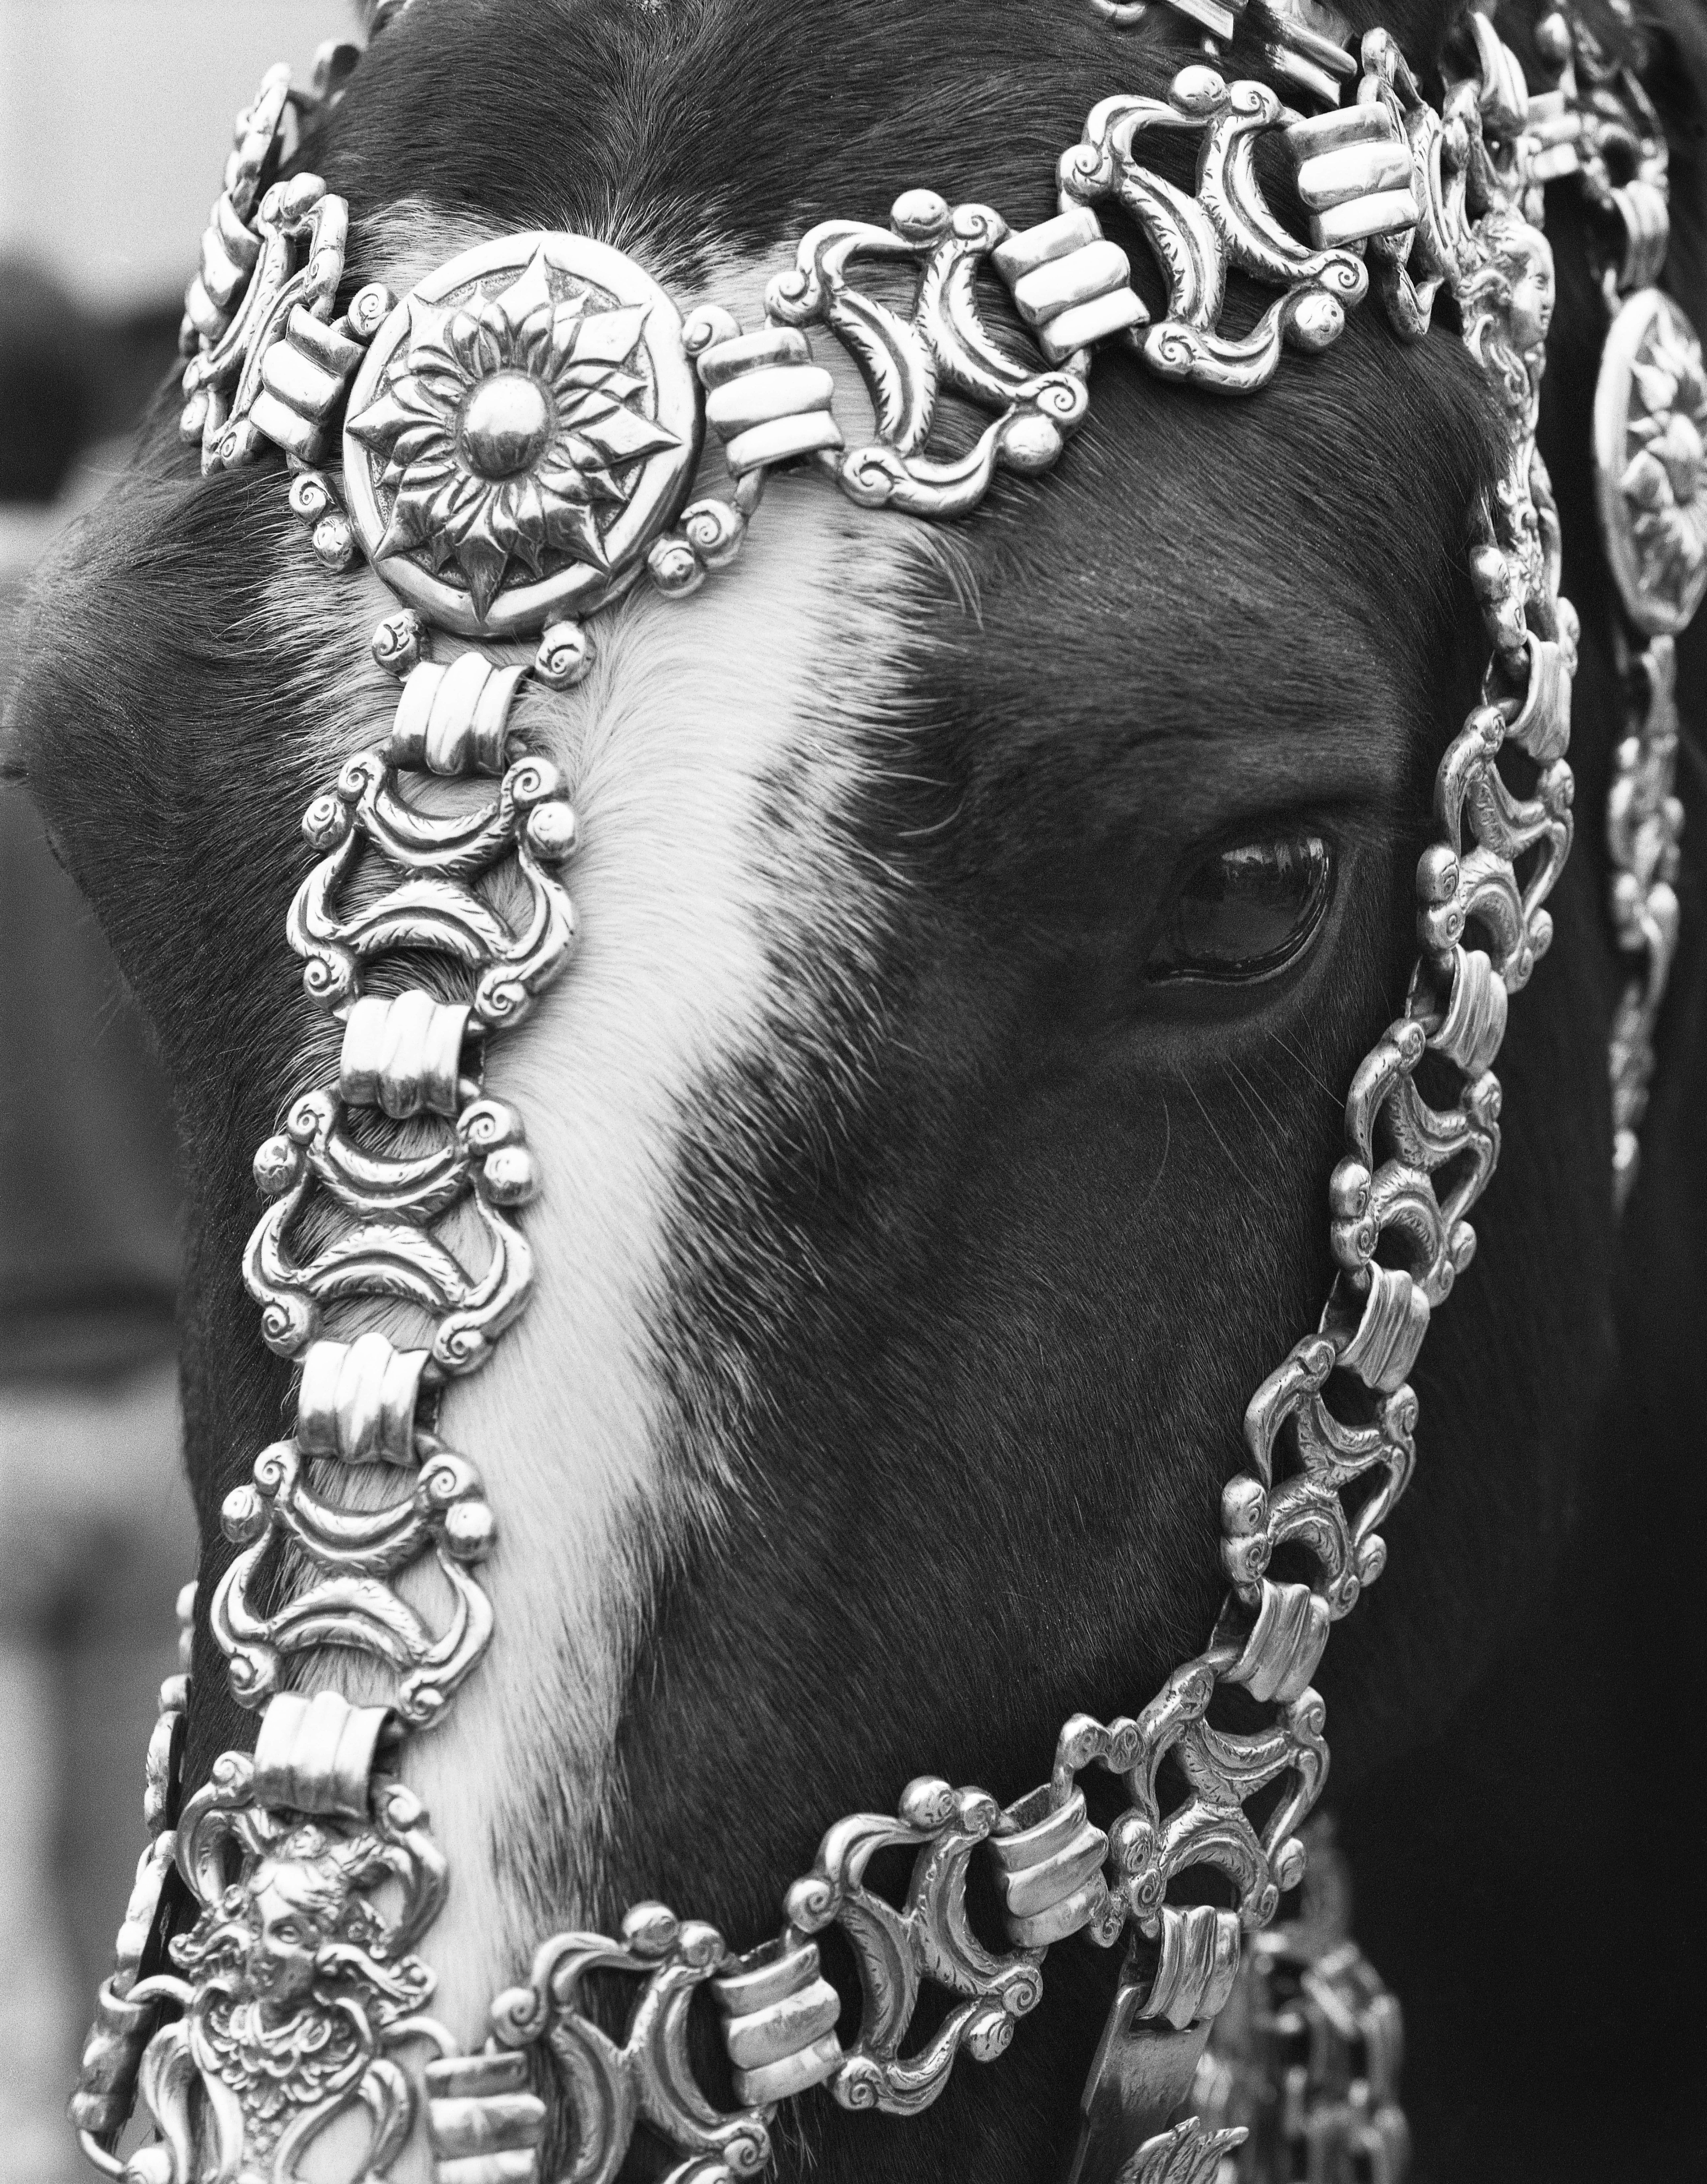 Aldo Sessa Black and White Photograph - Silver Head Harness (Province of Buenos Aires Argentina)